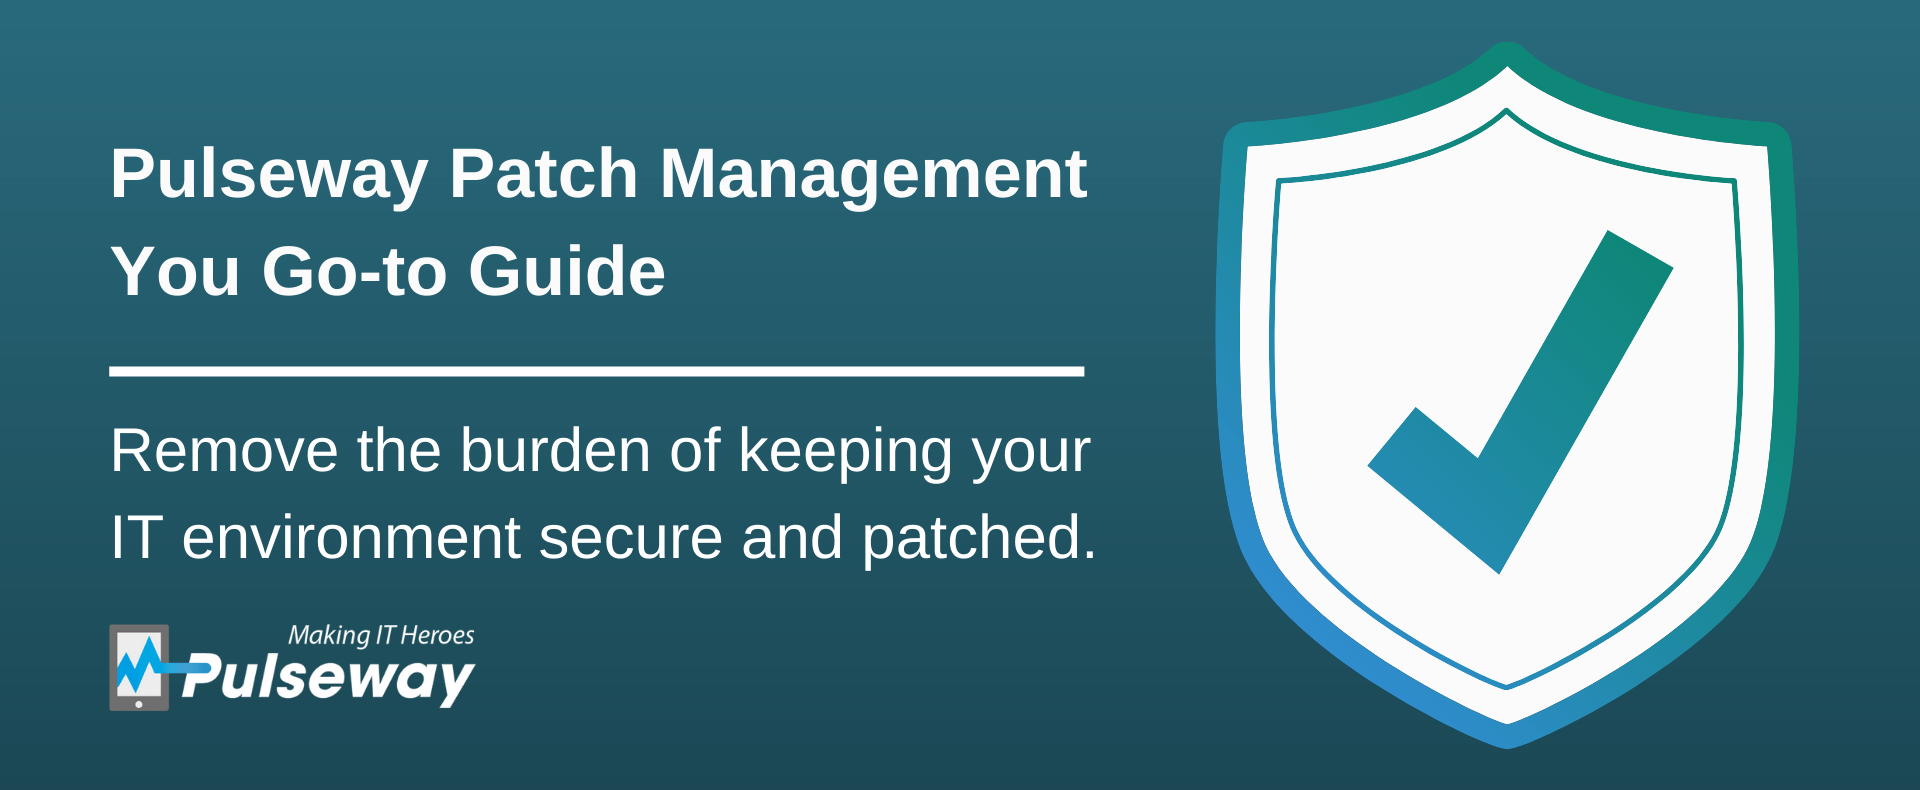 Protect Your IT Environment With Pulseway Patch Management